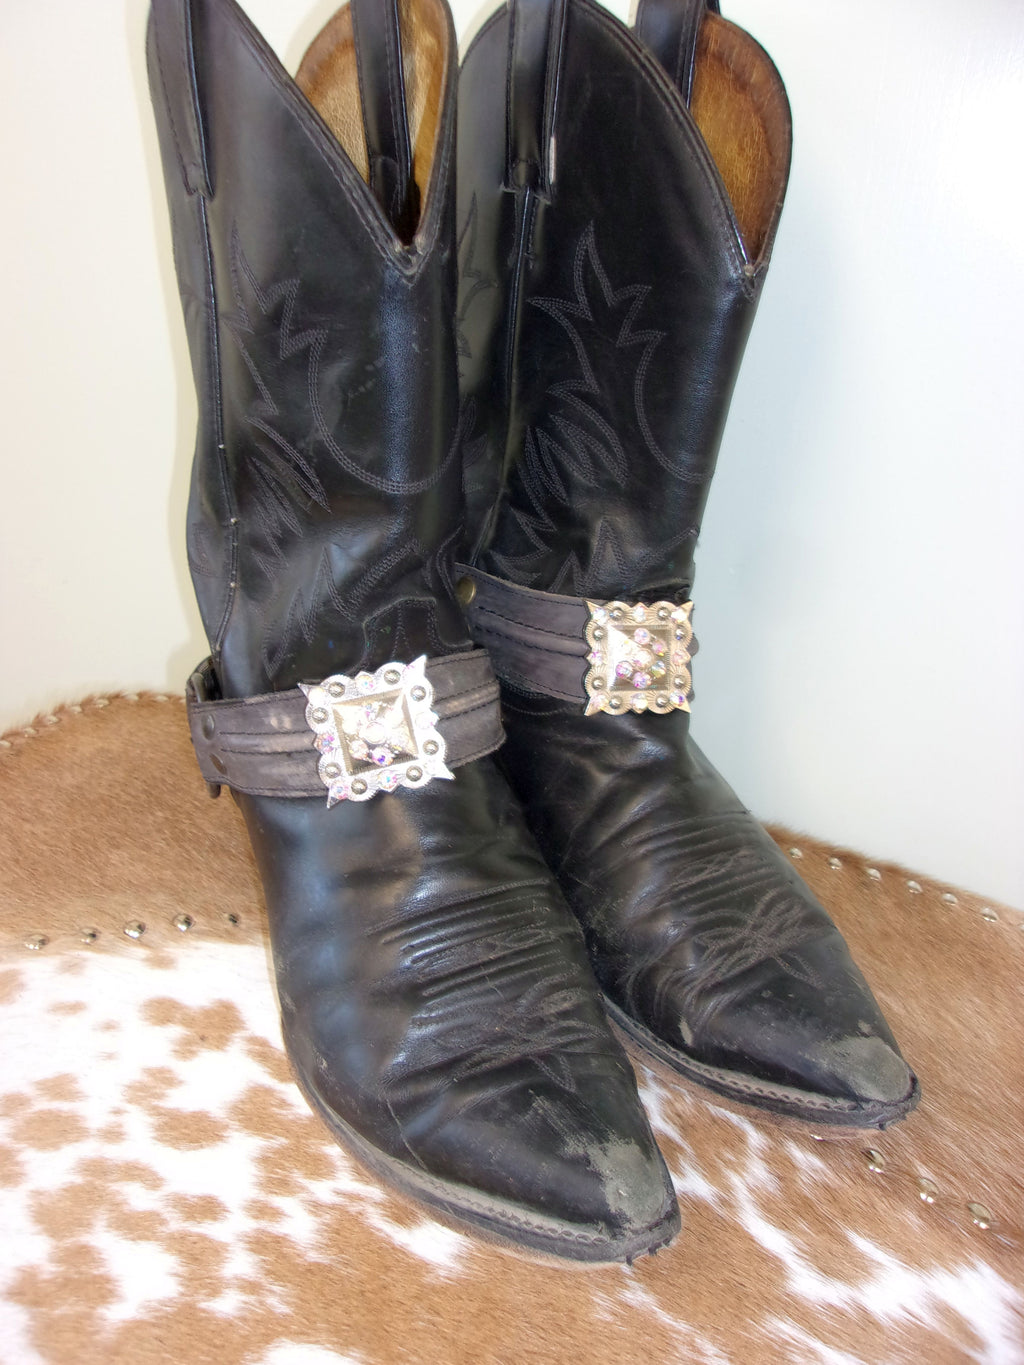 Boot Decoration - Boot Wrap - Boot Bling - Boot Jewelry - Boot Bracelet (Pair) bw27 Chris Thompson Bags